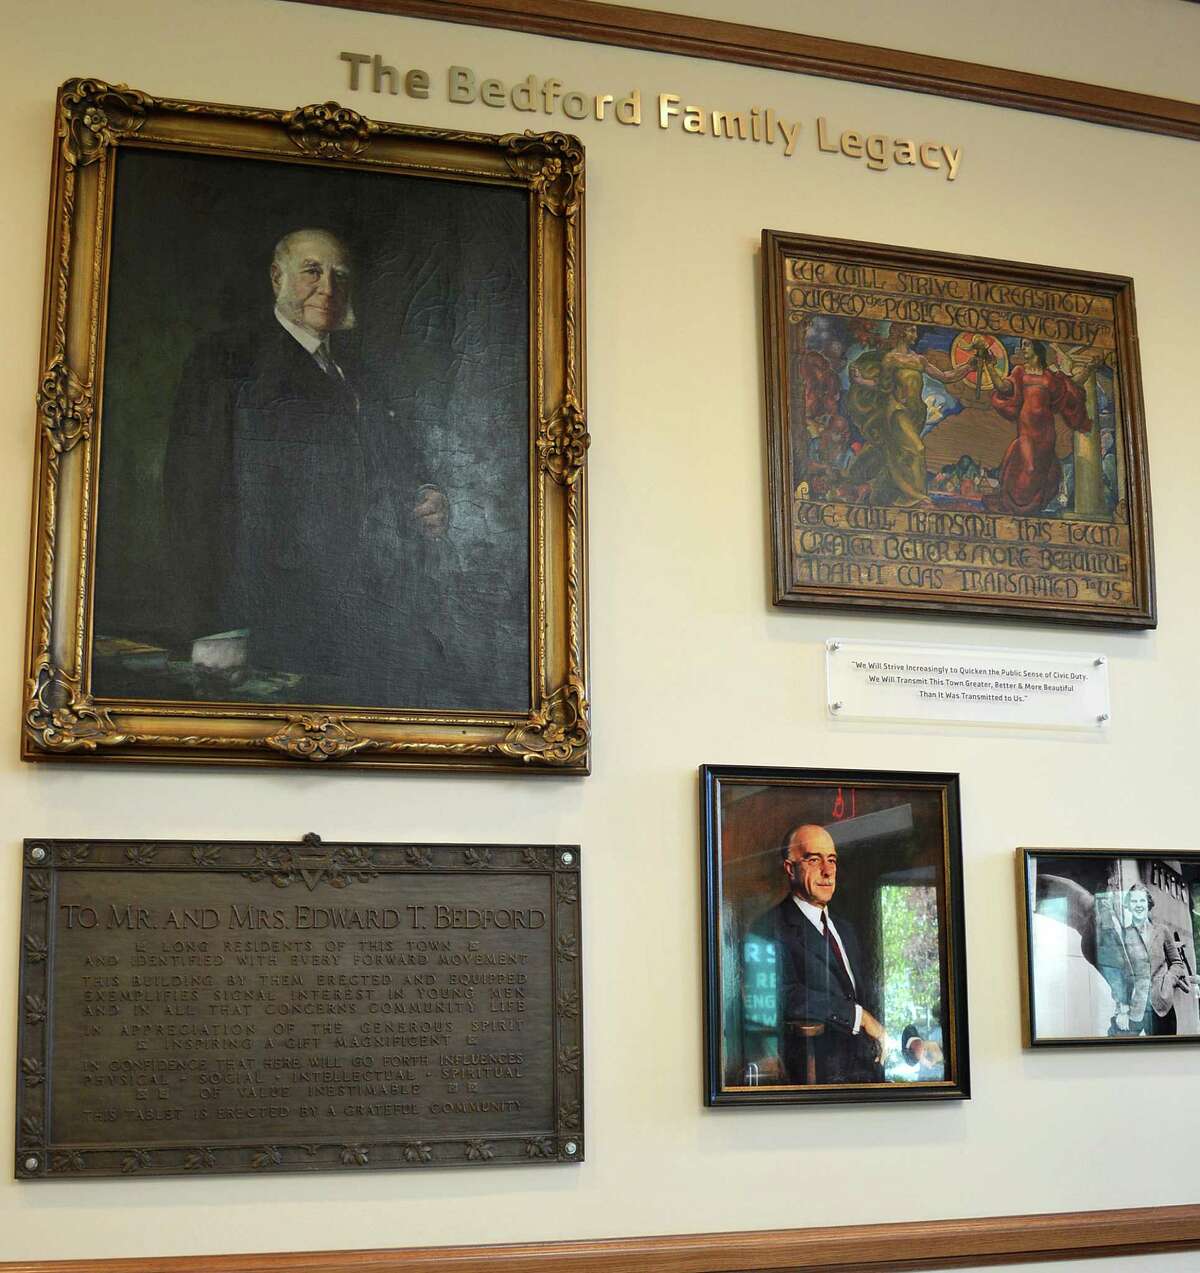 A portrait of Edward T. Bedford, upper left, the founder of the Westport- Weston Family YMCA, along with other memorabilia is featured on the Bedford Family Legacy Wall in the new Y on its Mahackeno campus.